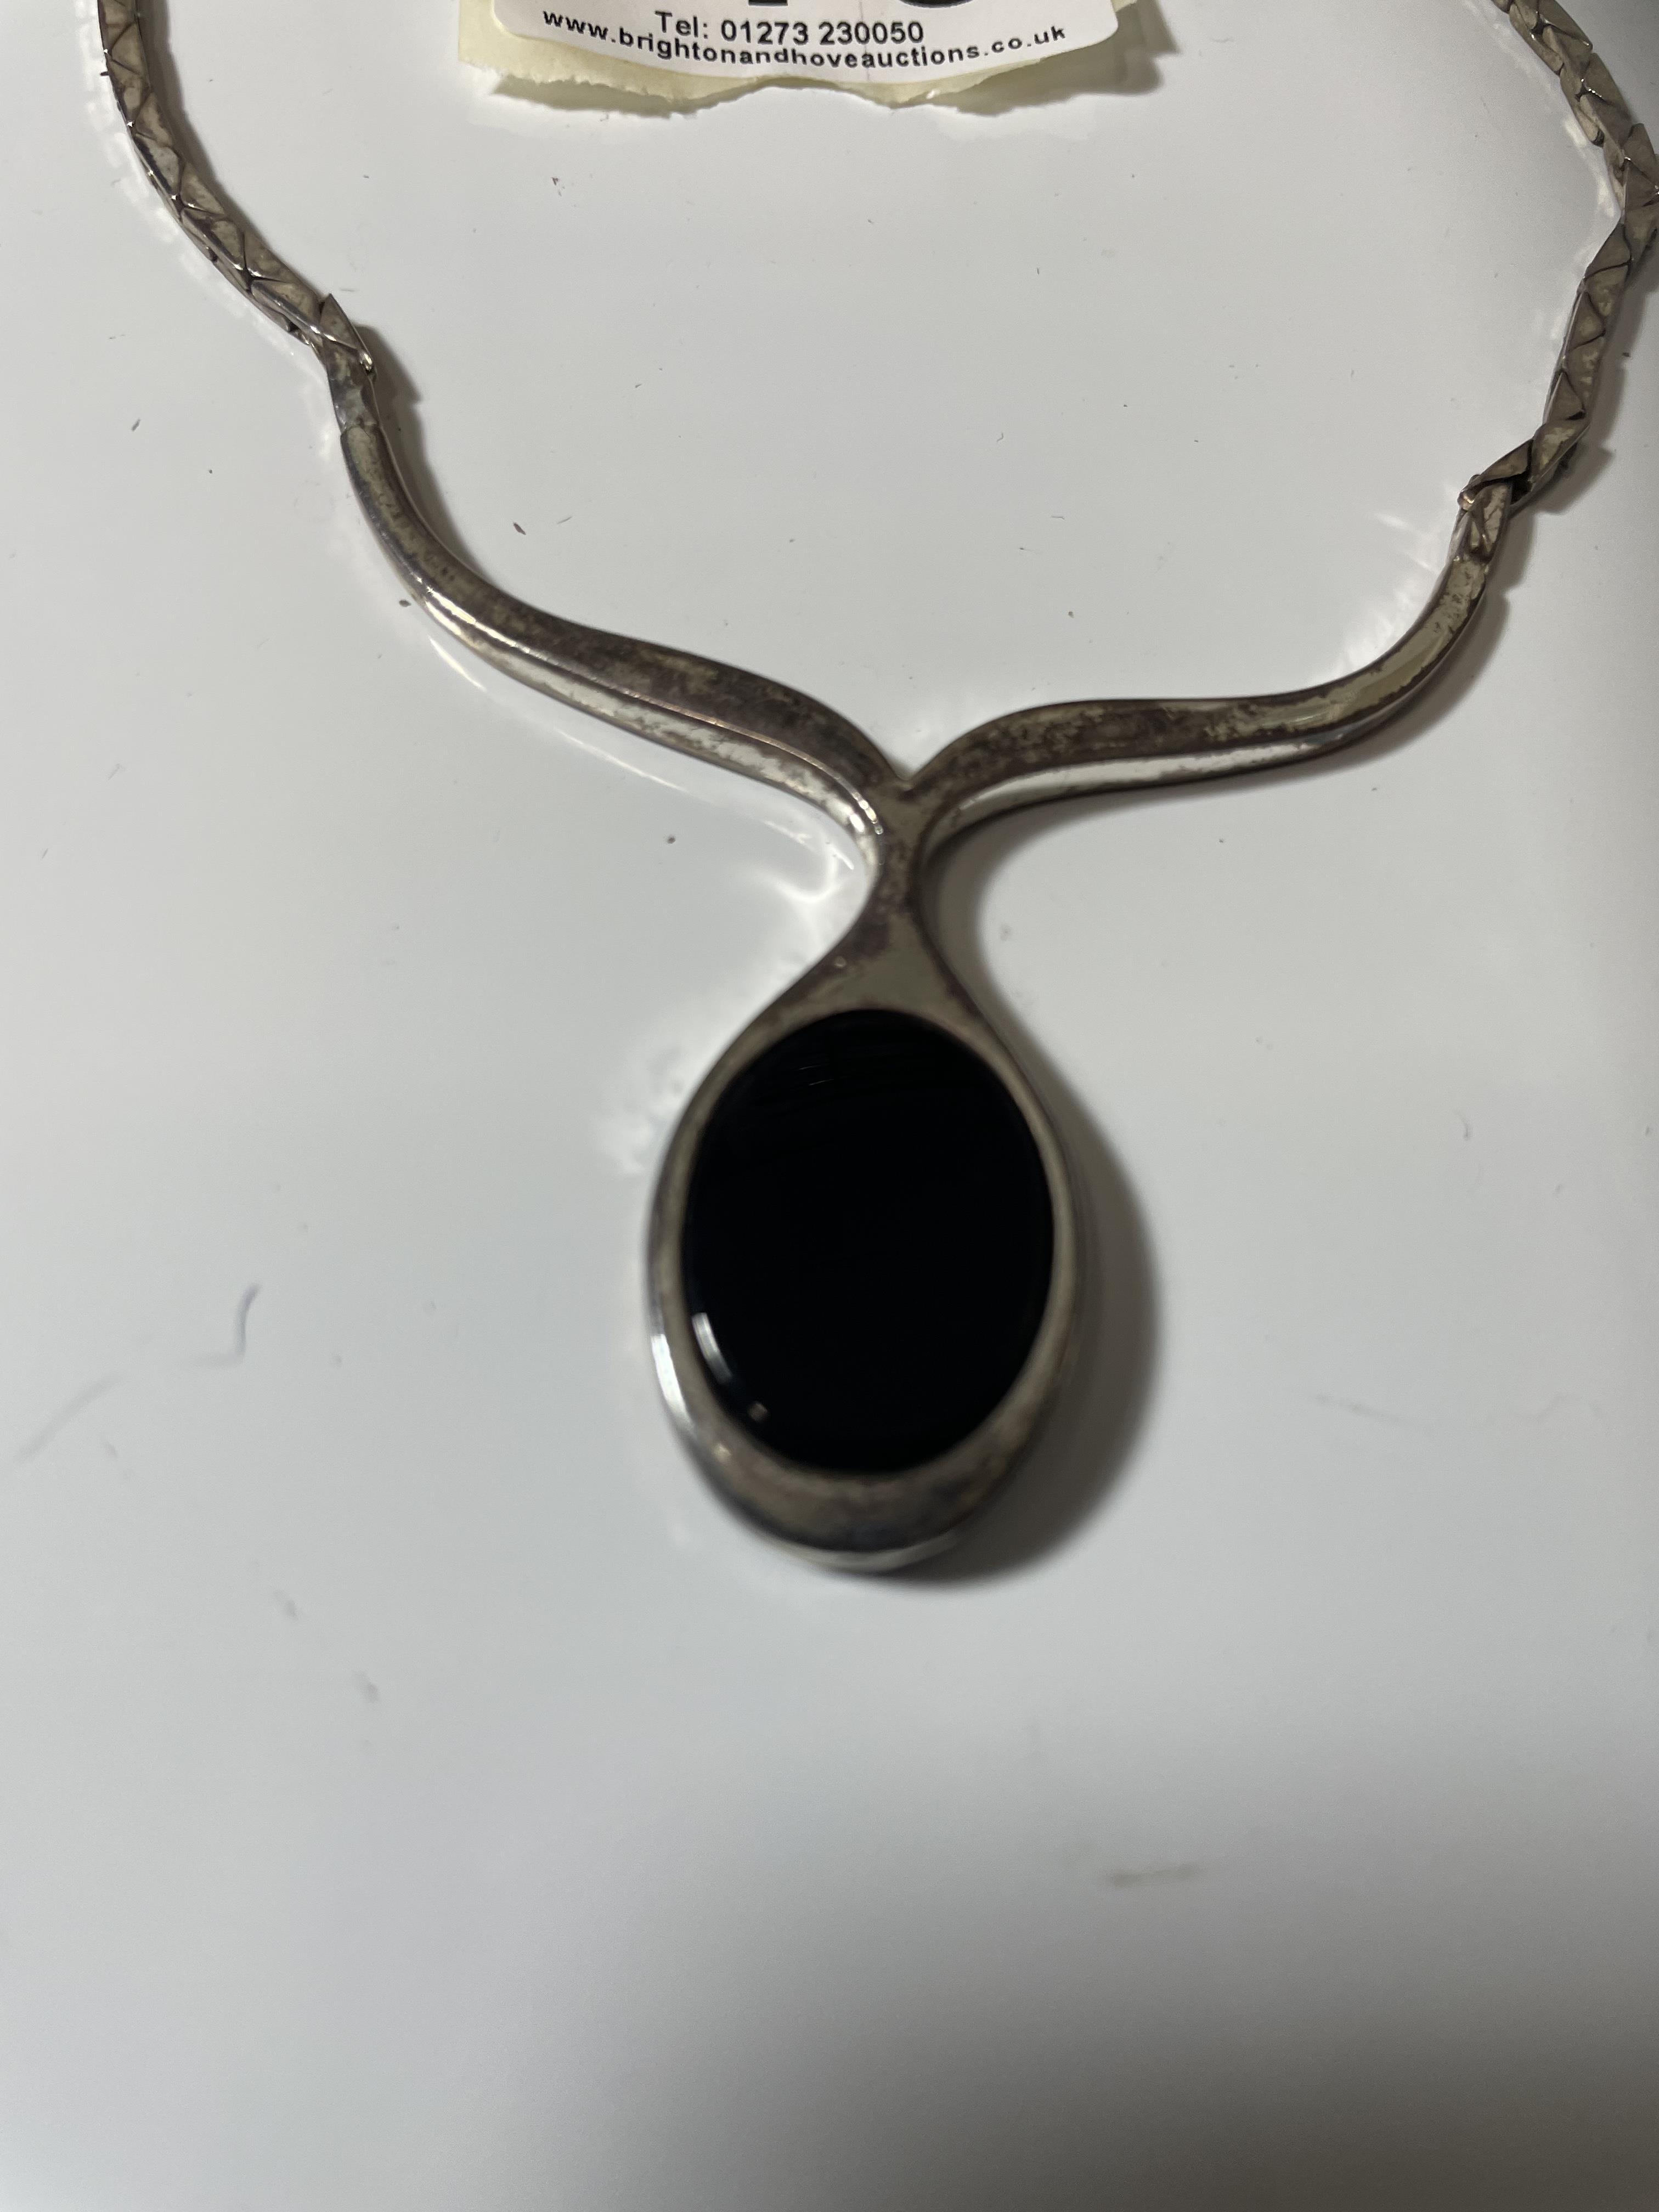 A WHITE METAL NECKLACE COMBINED BLACK ONYX PENDANT, STAMPED 835, AND A WHITE METAL BRACELET - Image 4 of 5